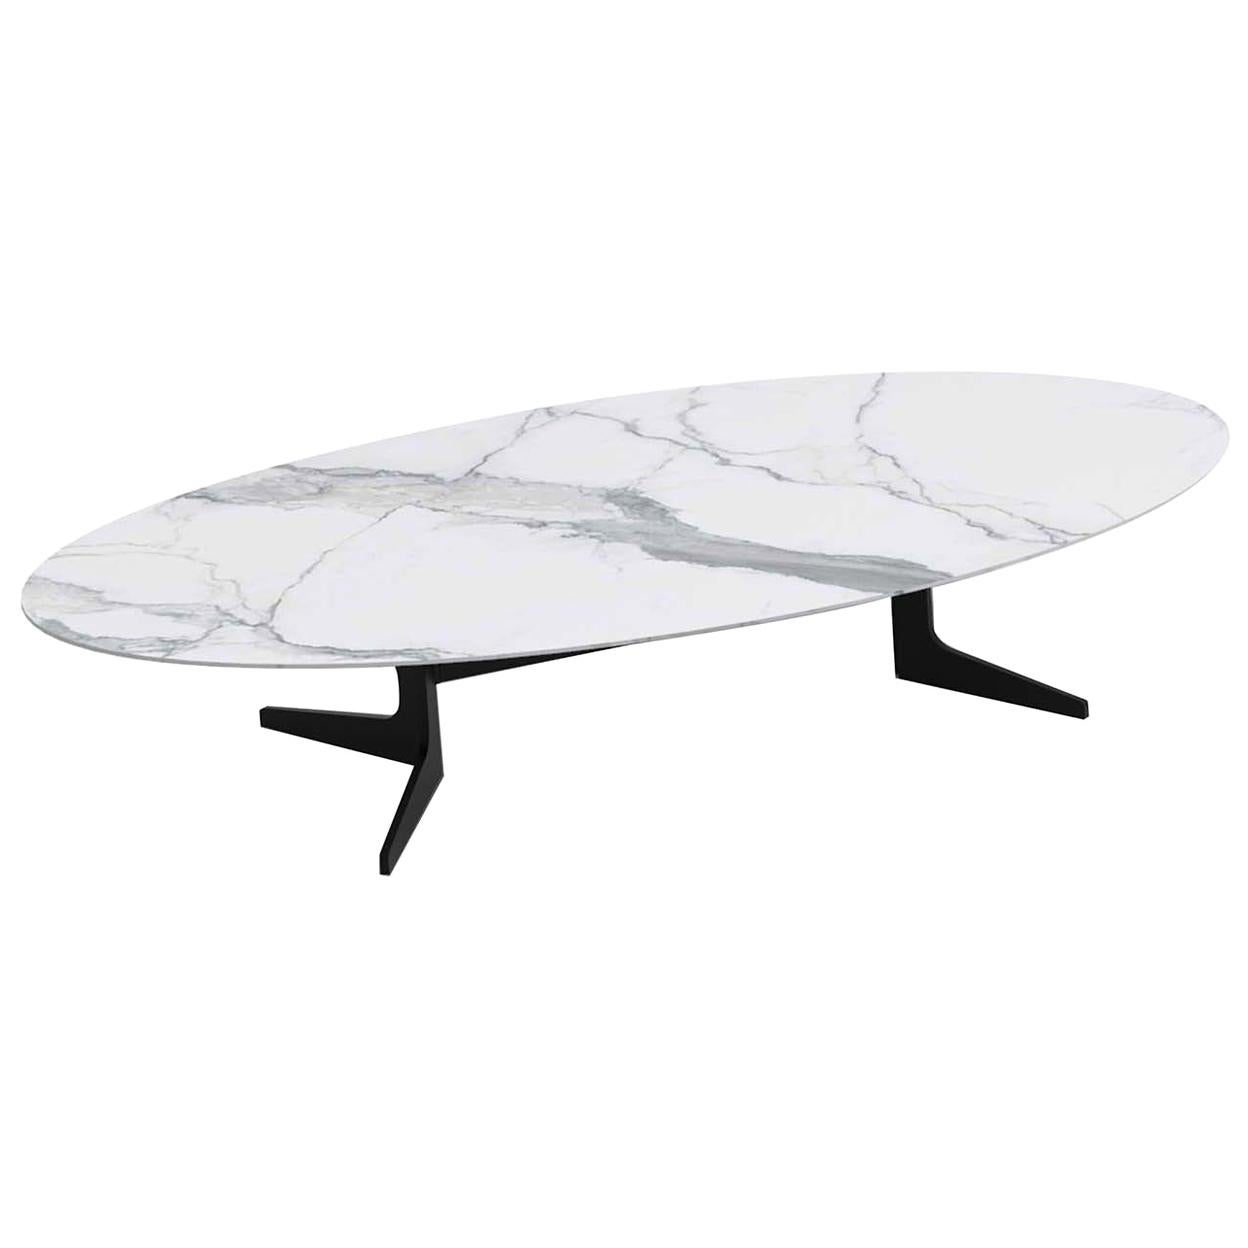 Blake Oval Coffee Table with Calacatta Marble Top